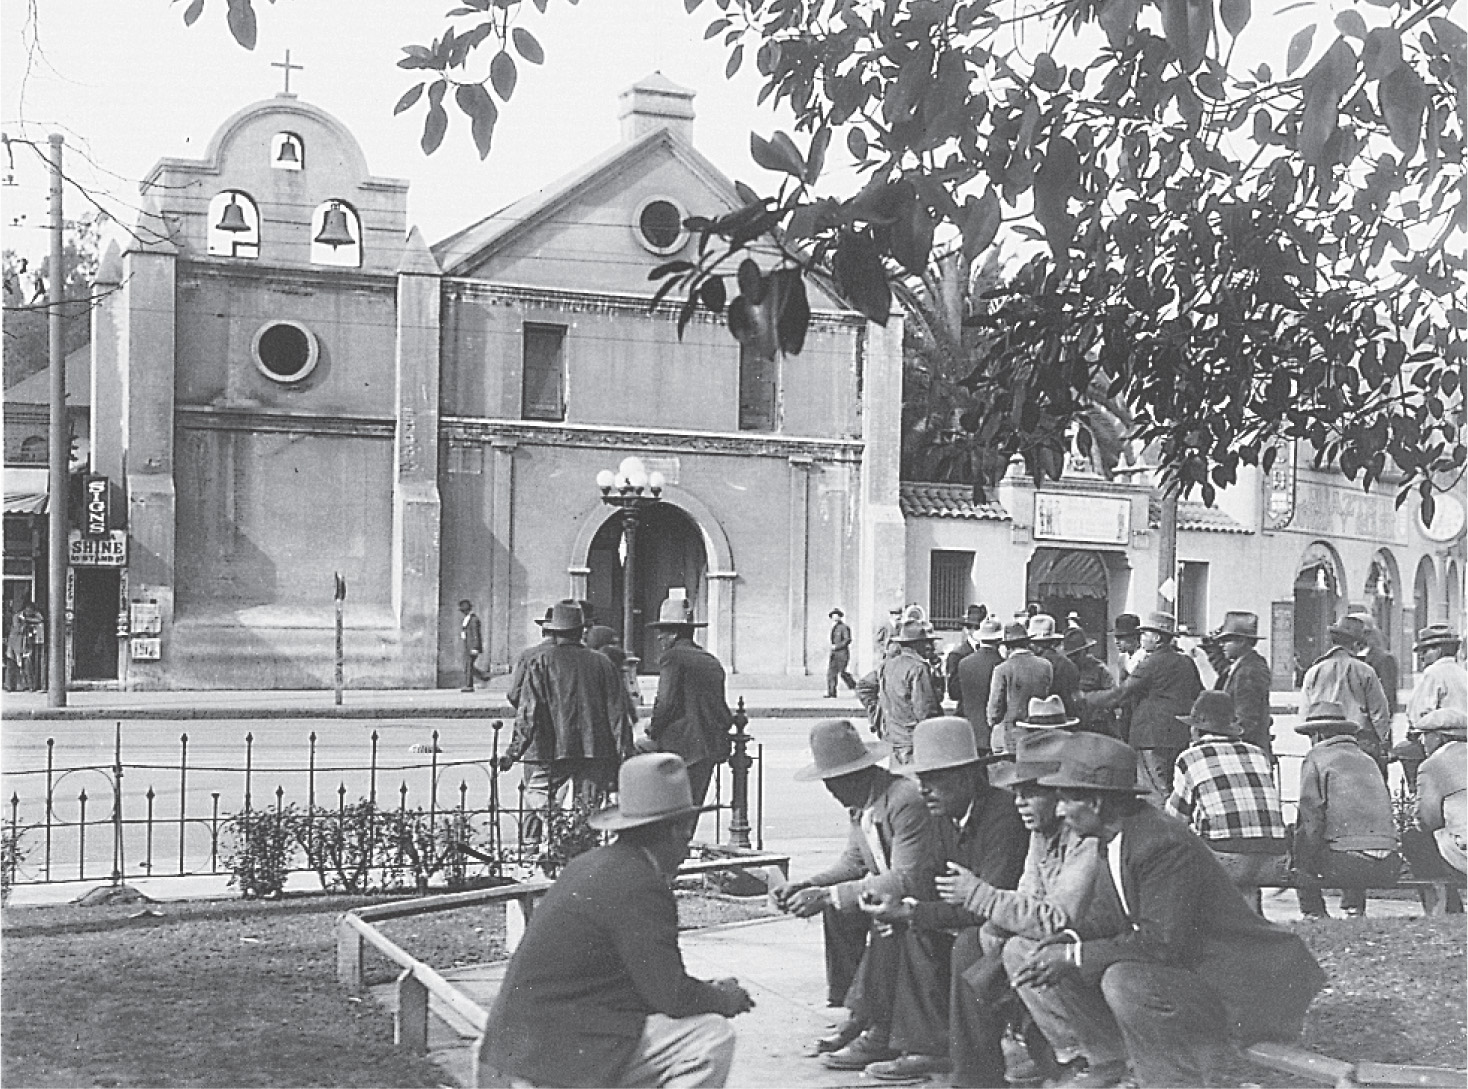 photo: men wearing broad-brimmed hats gather in a park across from a church.